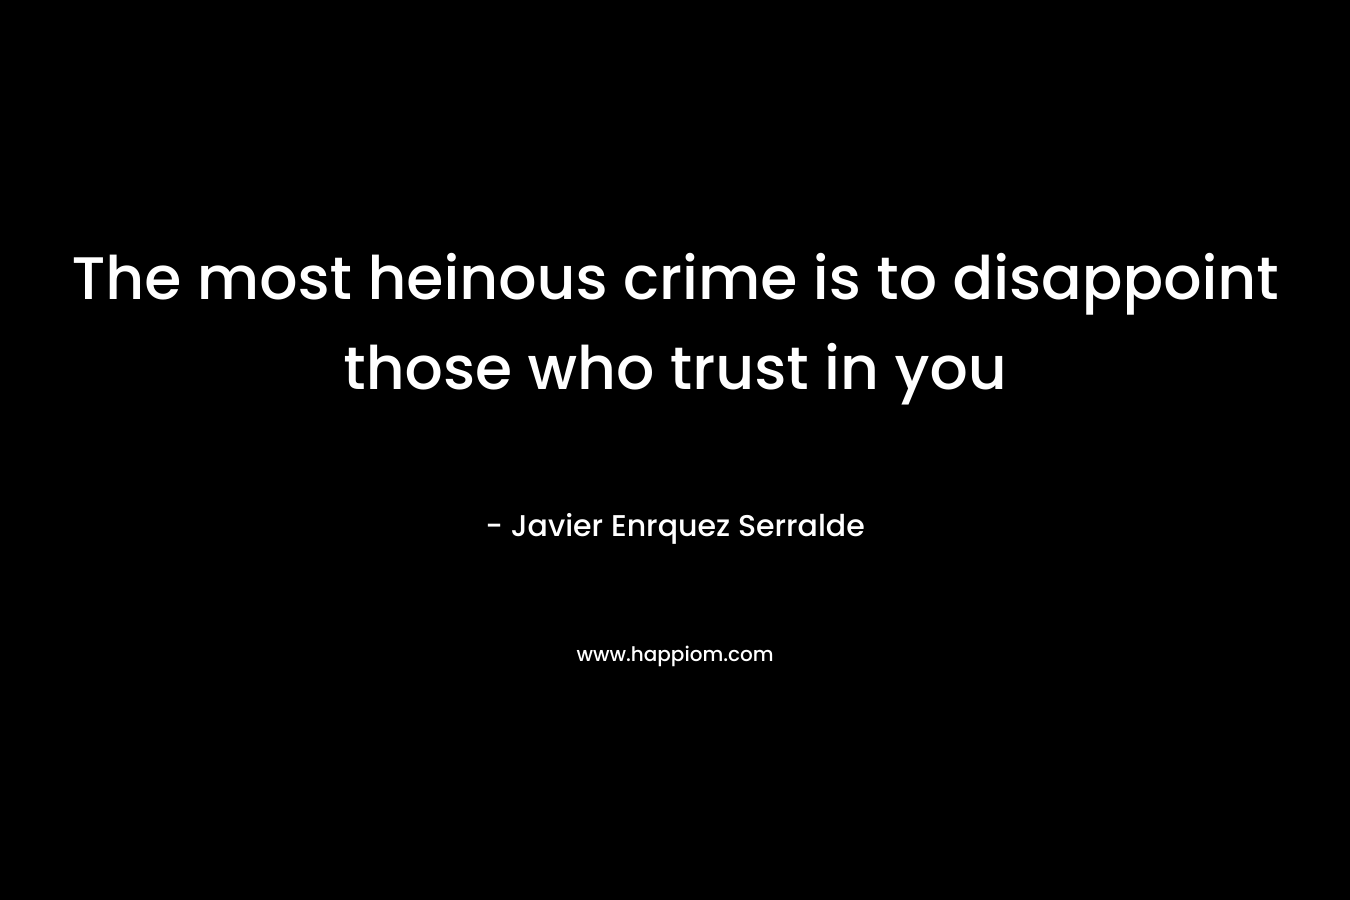 The most heinous crime is to disappoint those who trust in you